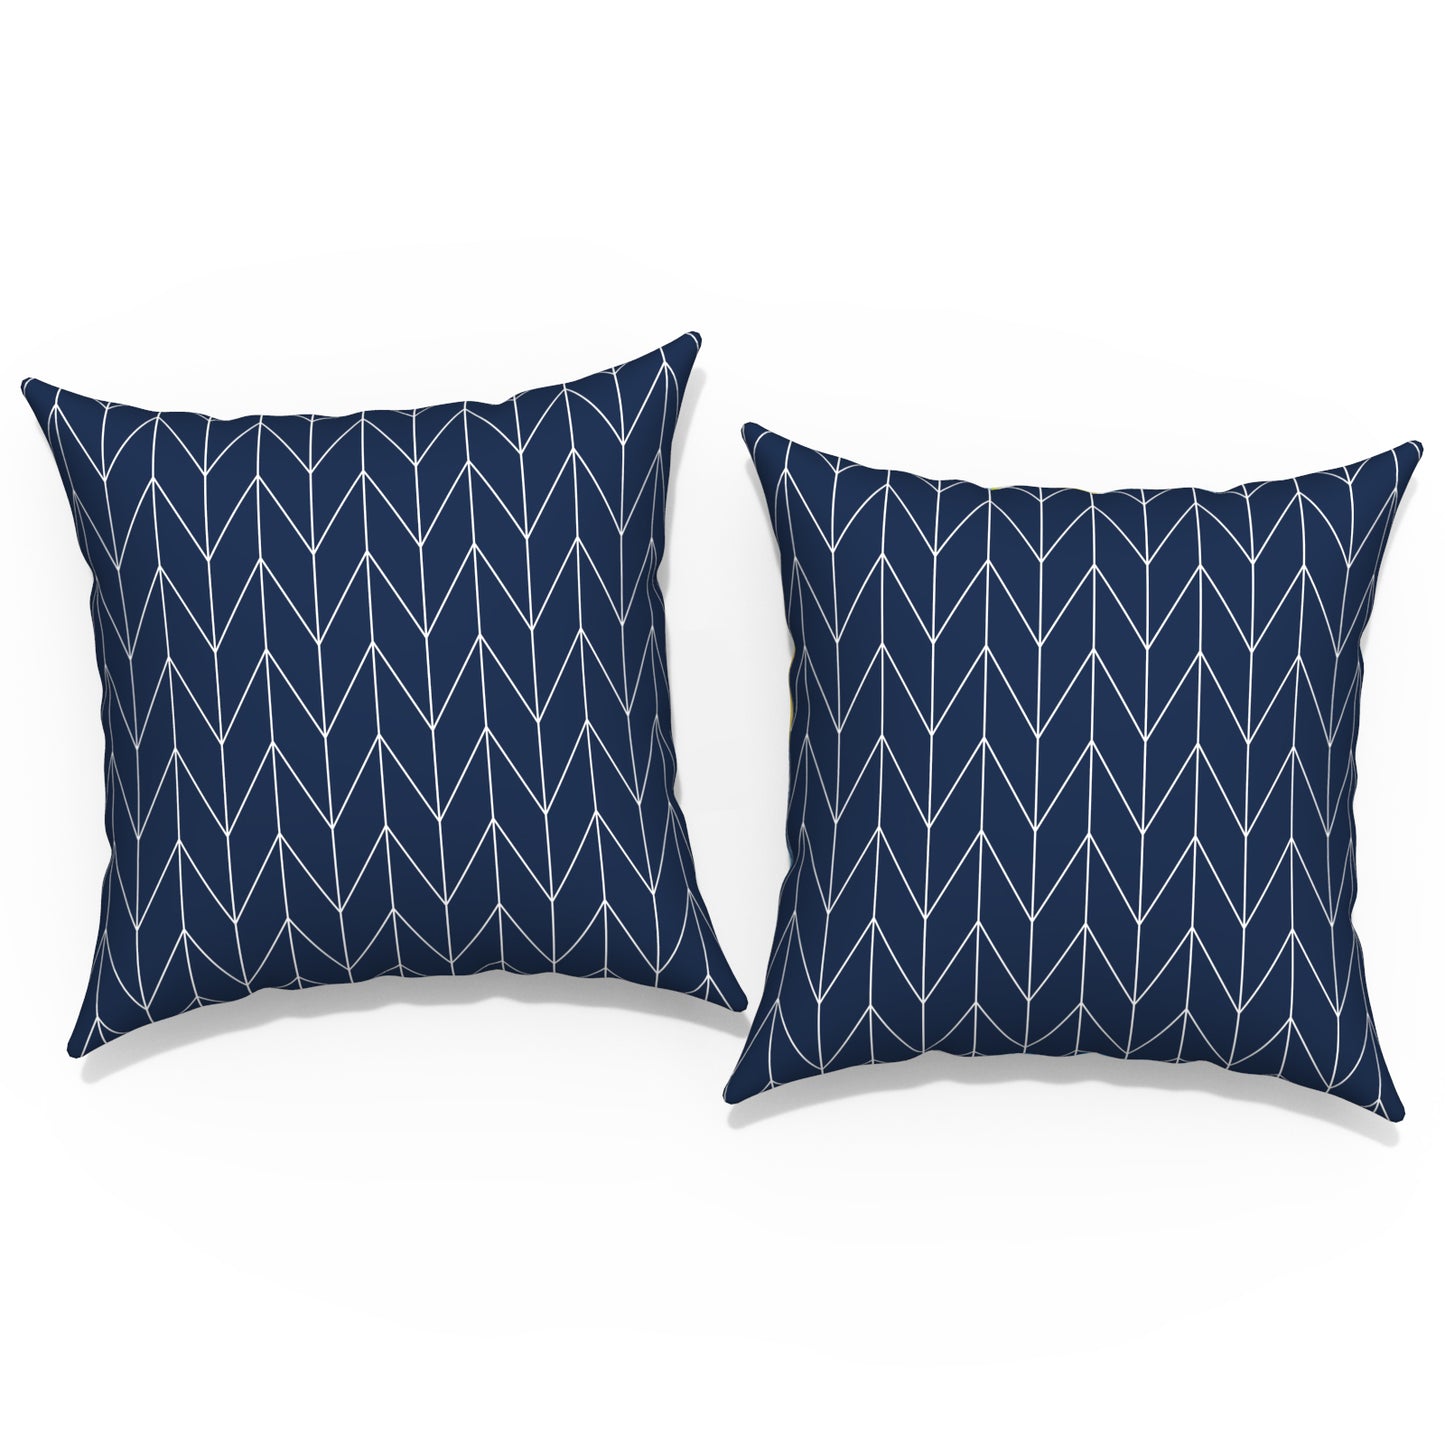 Melody Elephant Outdoor/Indoor Throw Pillow Covers Set of 2, All Weather Square Pillow Cases 16x16 Inch, Patio Cushion Pillow of Home Furniture Use, Herringbone Navy